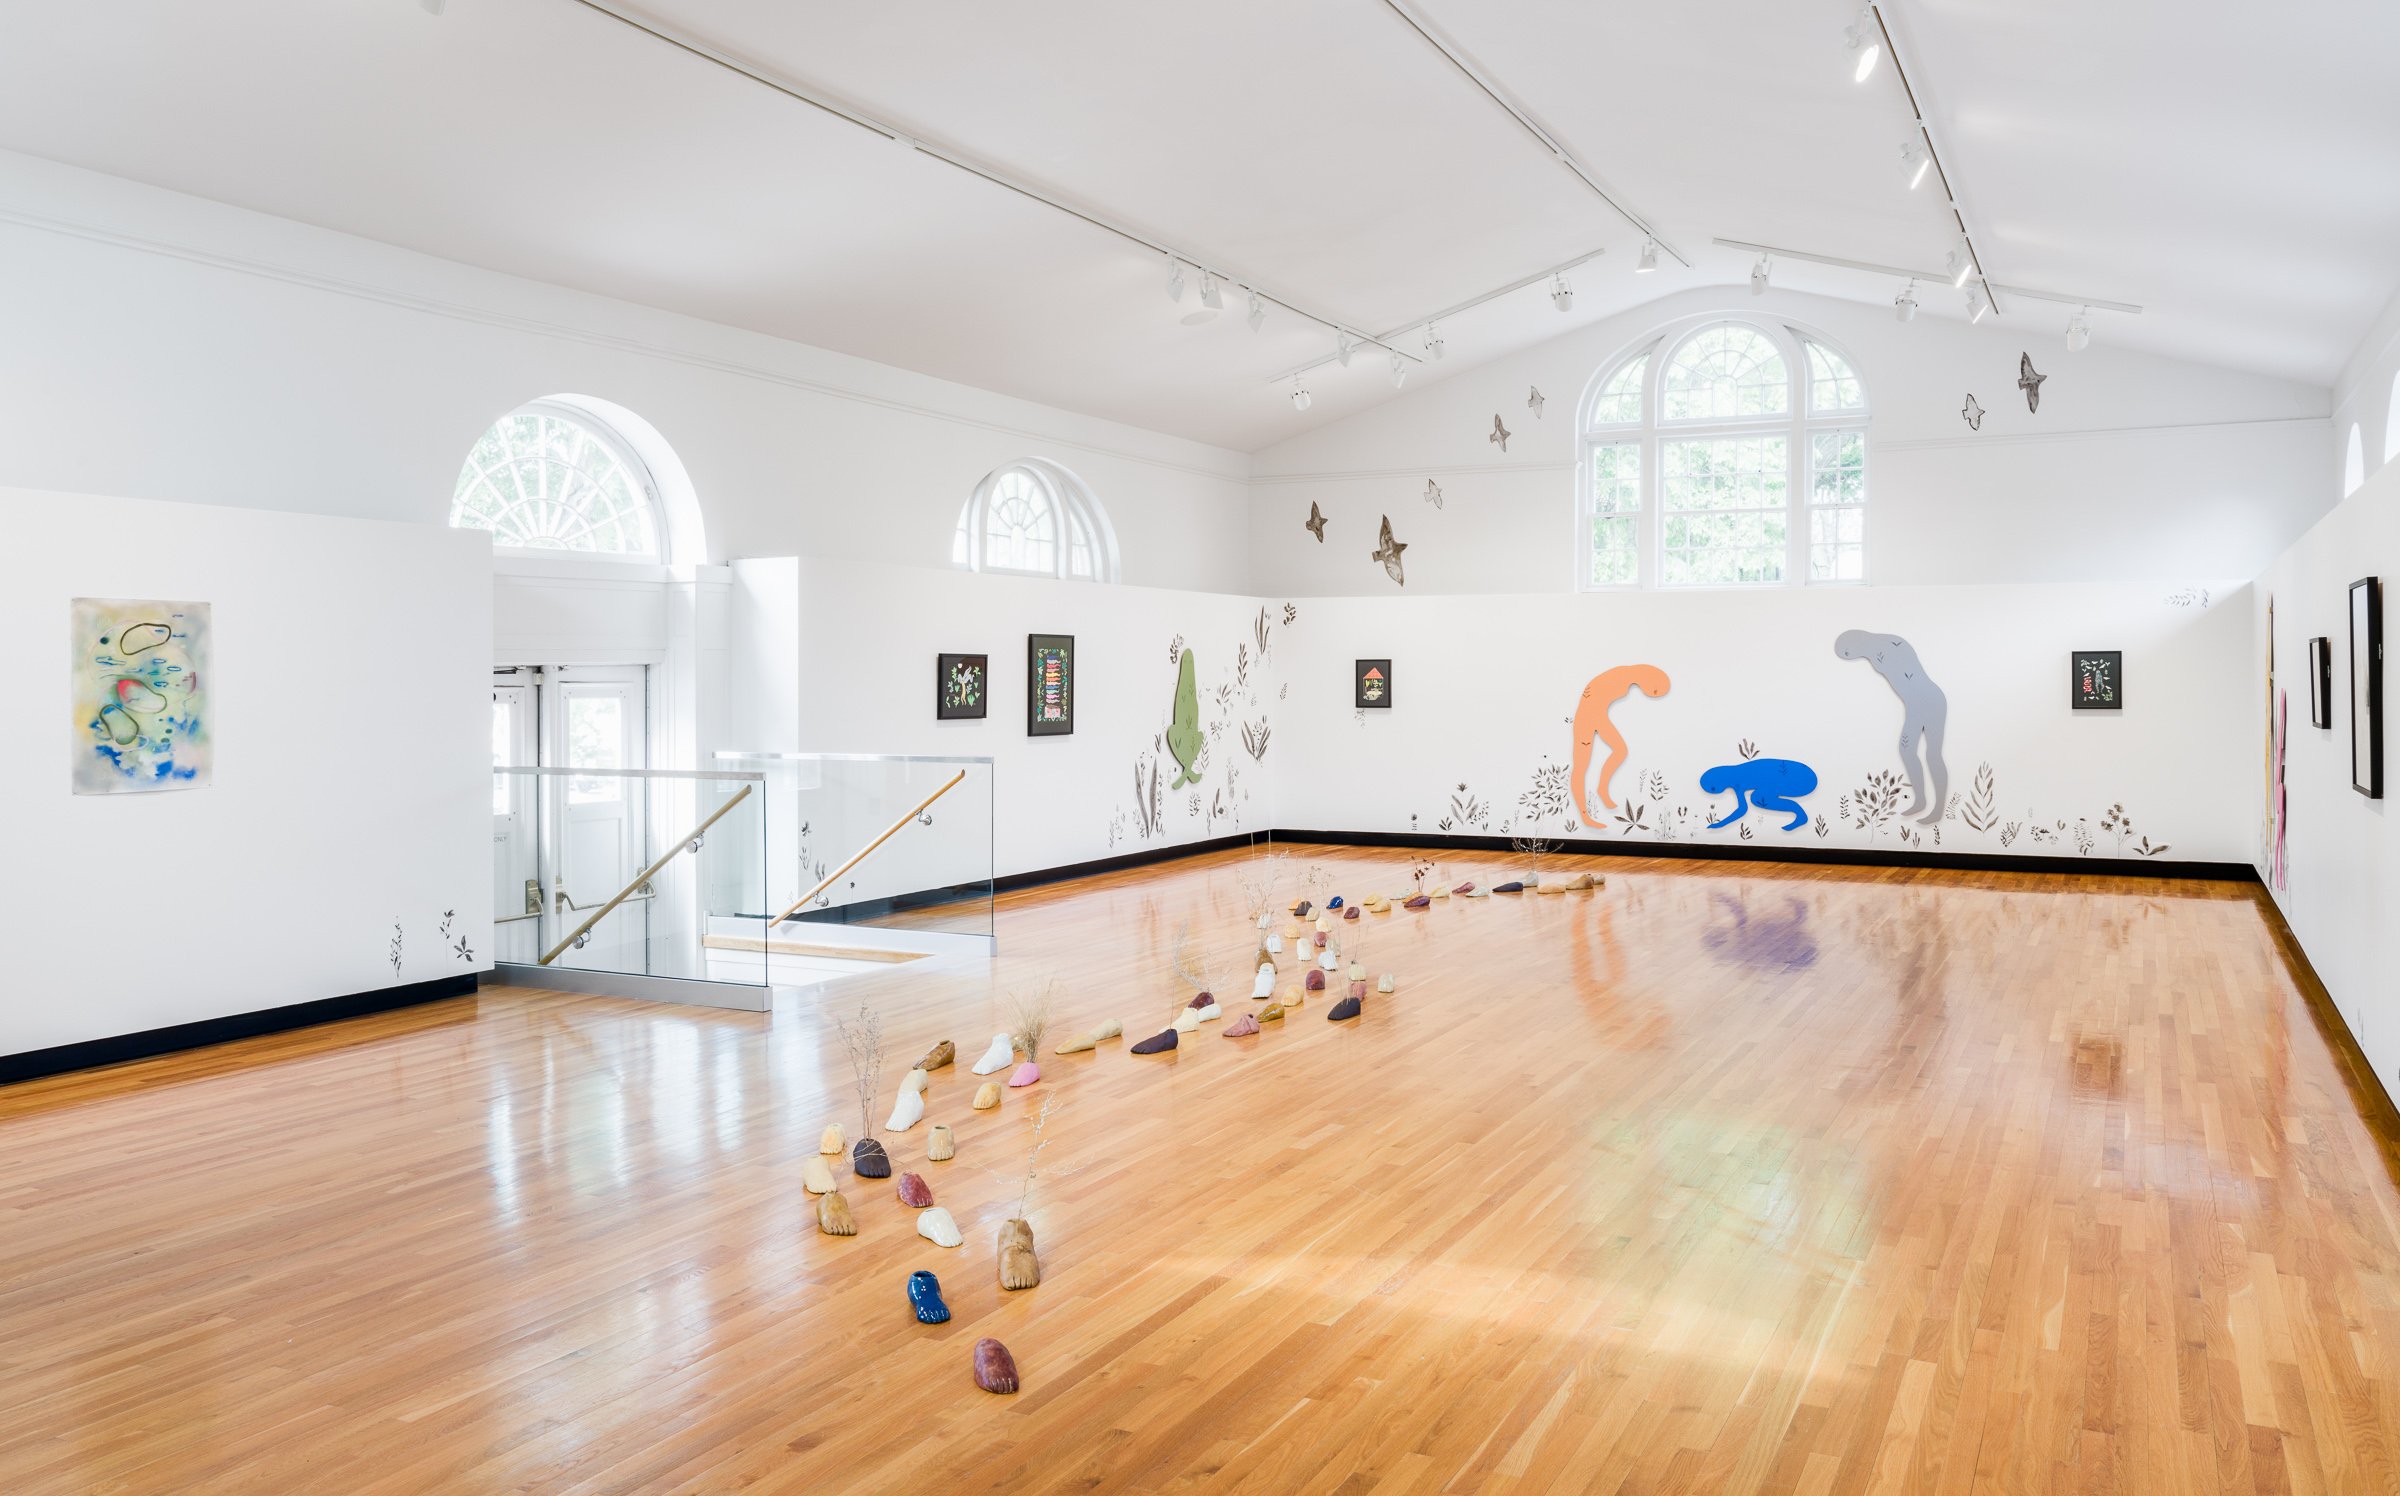  Installation view of  Gathering near and far, still  by April Matisz. All works courtesy of the artist. Photo by Blaine Campbell. 